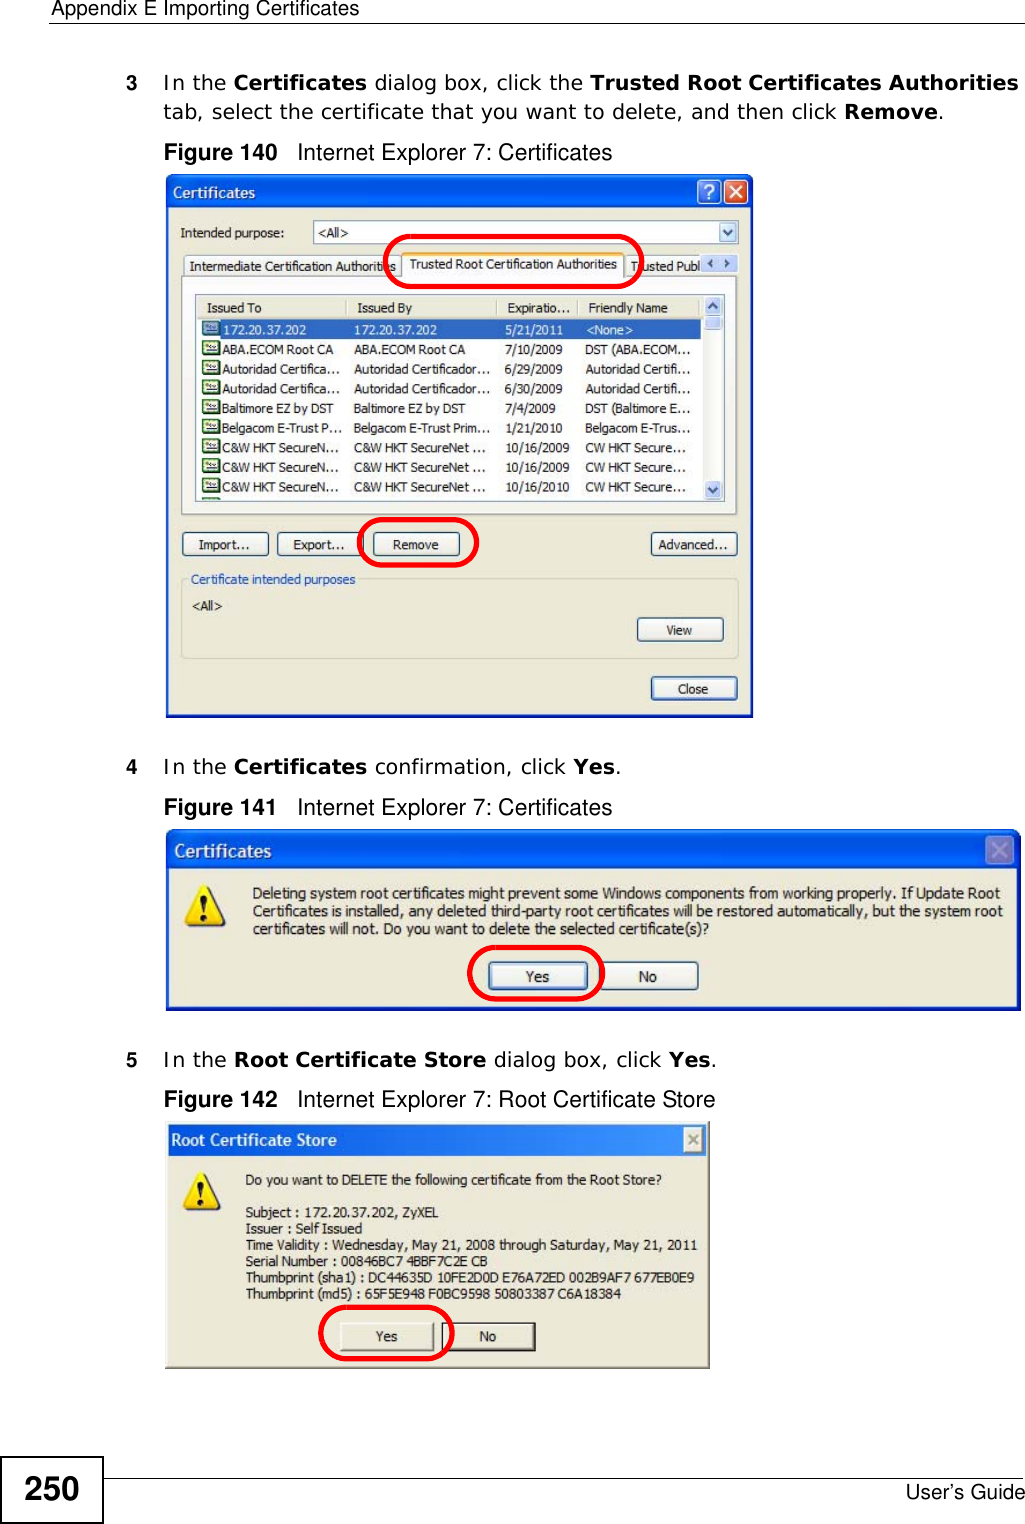 Appendix E Importing CertificatesUser’s Guide2503In the Certificates dialog box, click the Trusted Root Certificates Authorities tab, select the certificate that you want to delete, and then click Remove.Figure 140   Internet Explorer 7: Certificates4In the Certificates confirmation, click Yes.Figure 141   Internet Explorer 7: Certificates5In the Root Certificate Store dialog box, click Yes.Figure 142   Internet Explorer 7: Root Certificate Store